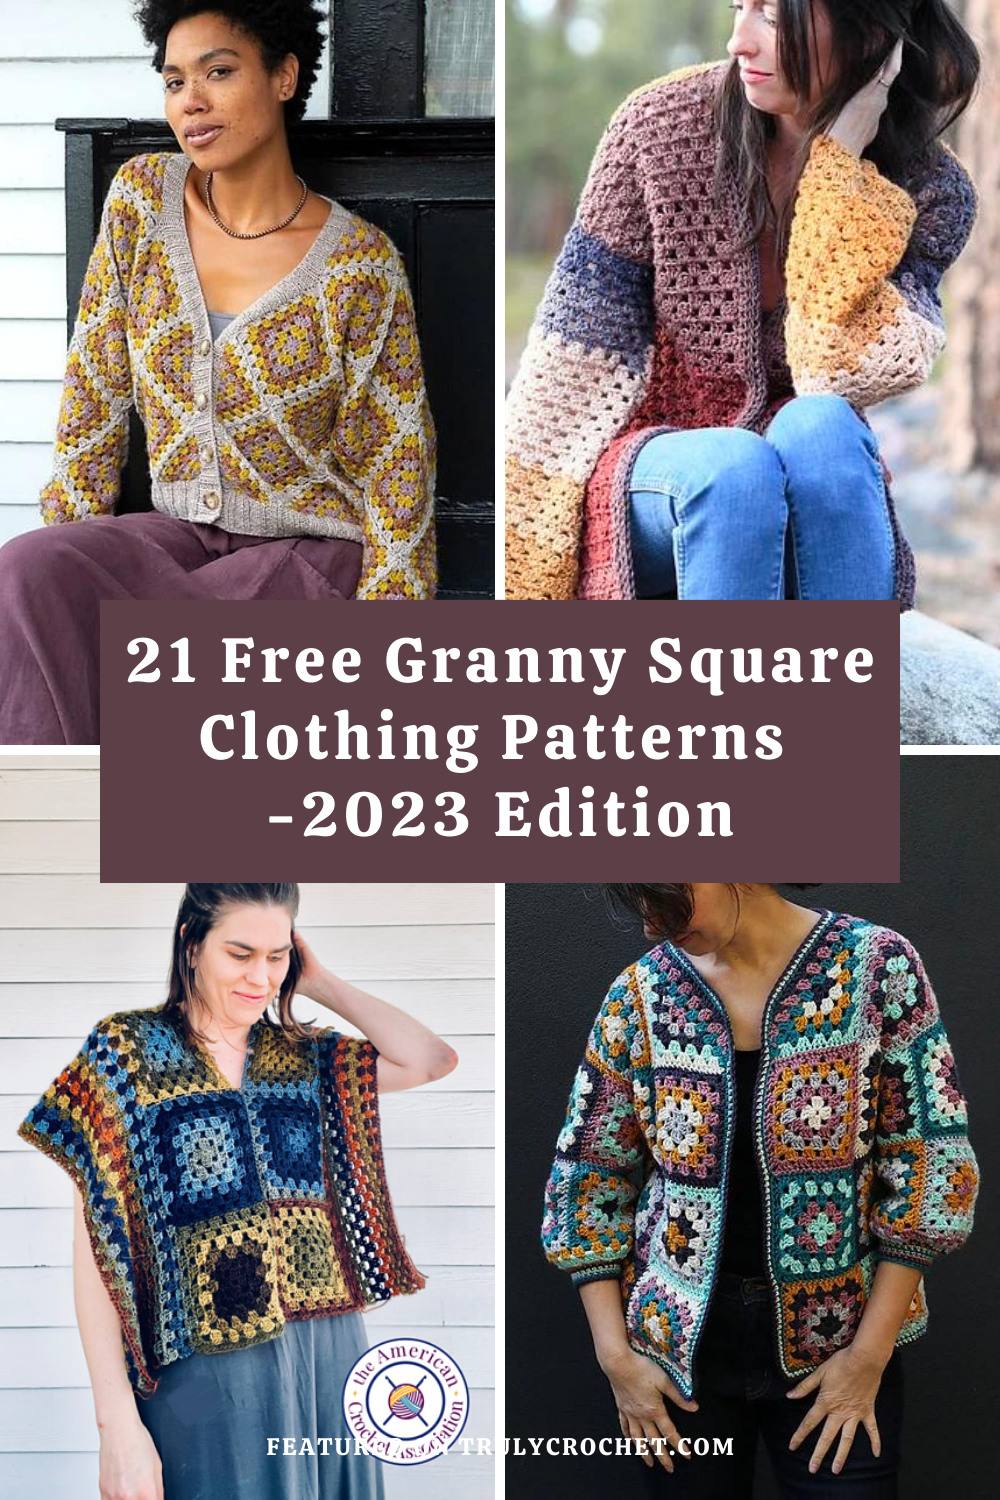 21 Free Granny Square Clothing Patterns - 2023 Edition